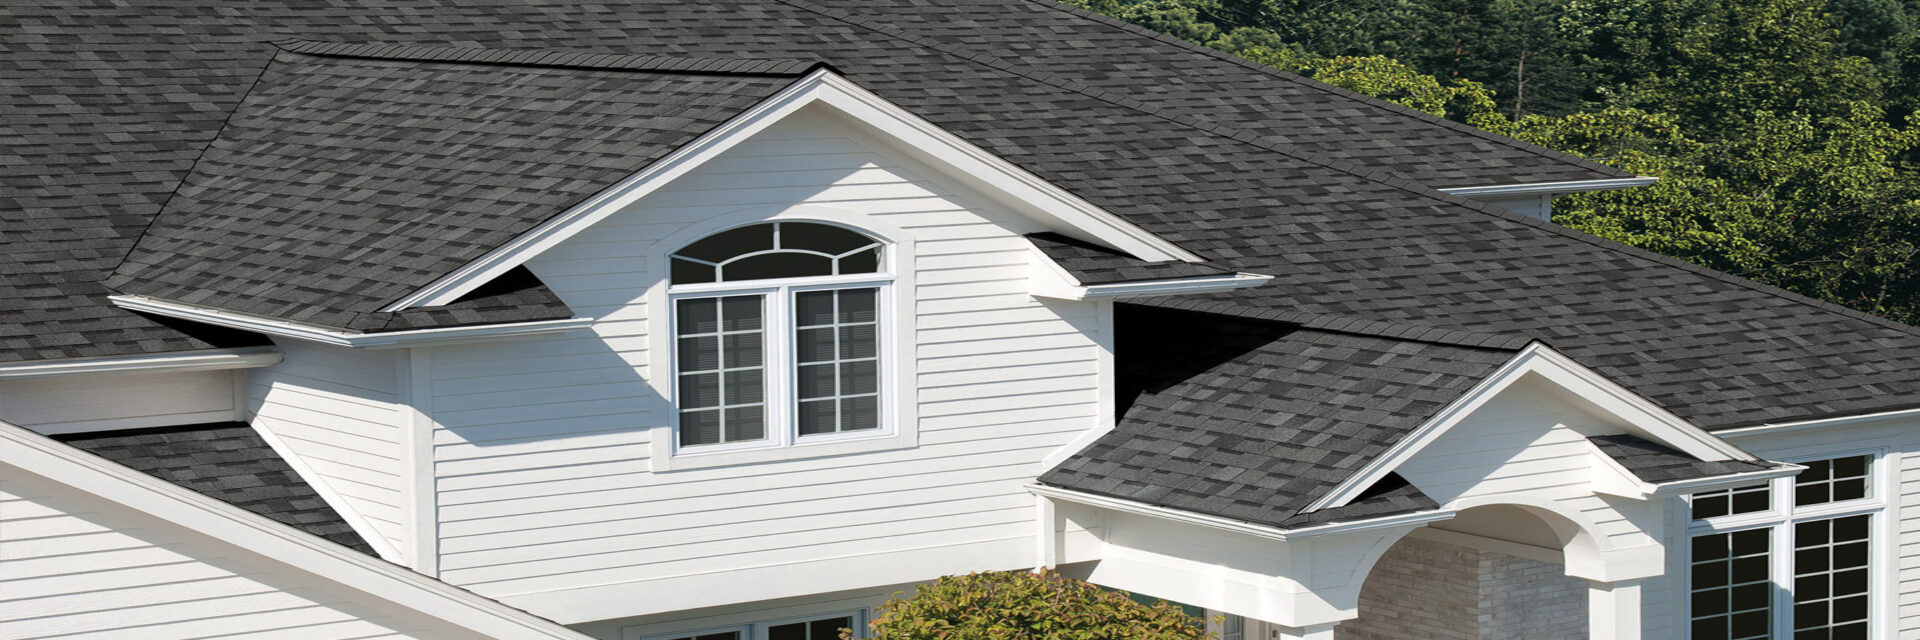 5 Ways to Prepare for Your Roof Replacement